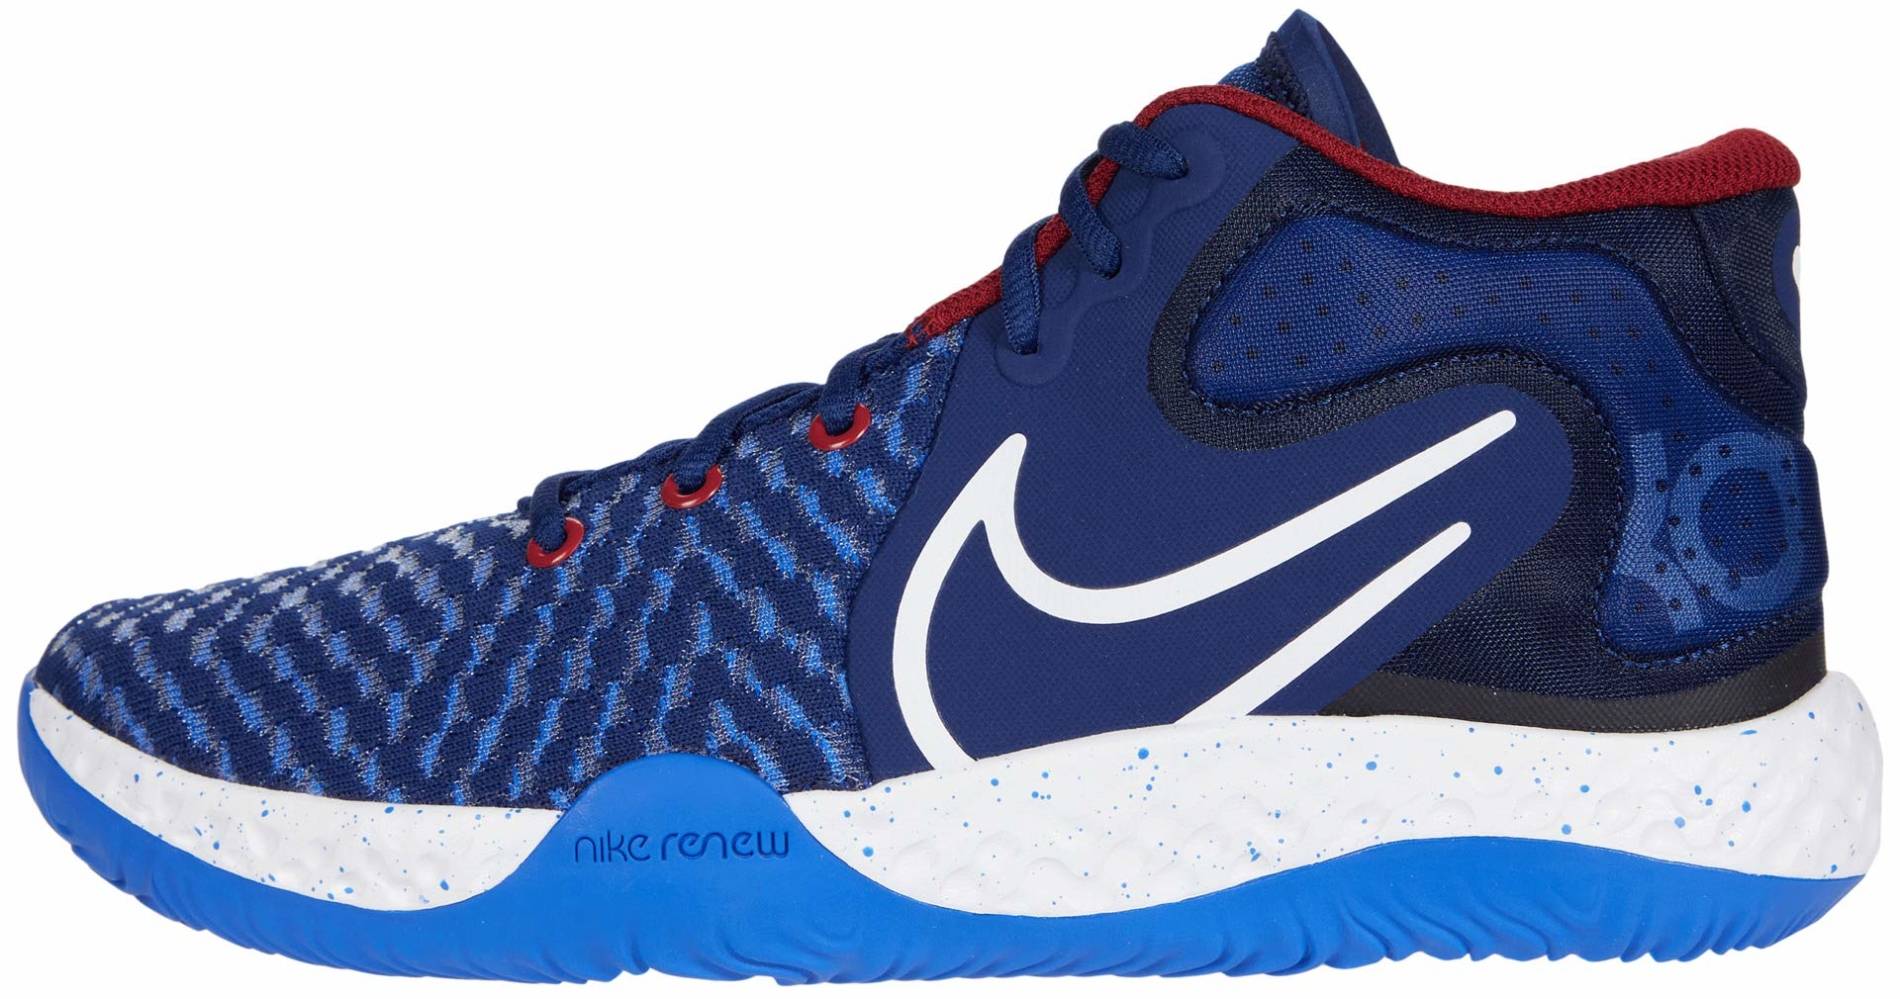 nike shoes blue and red